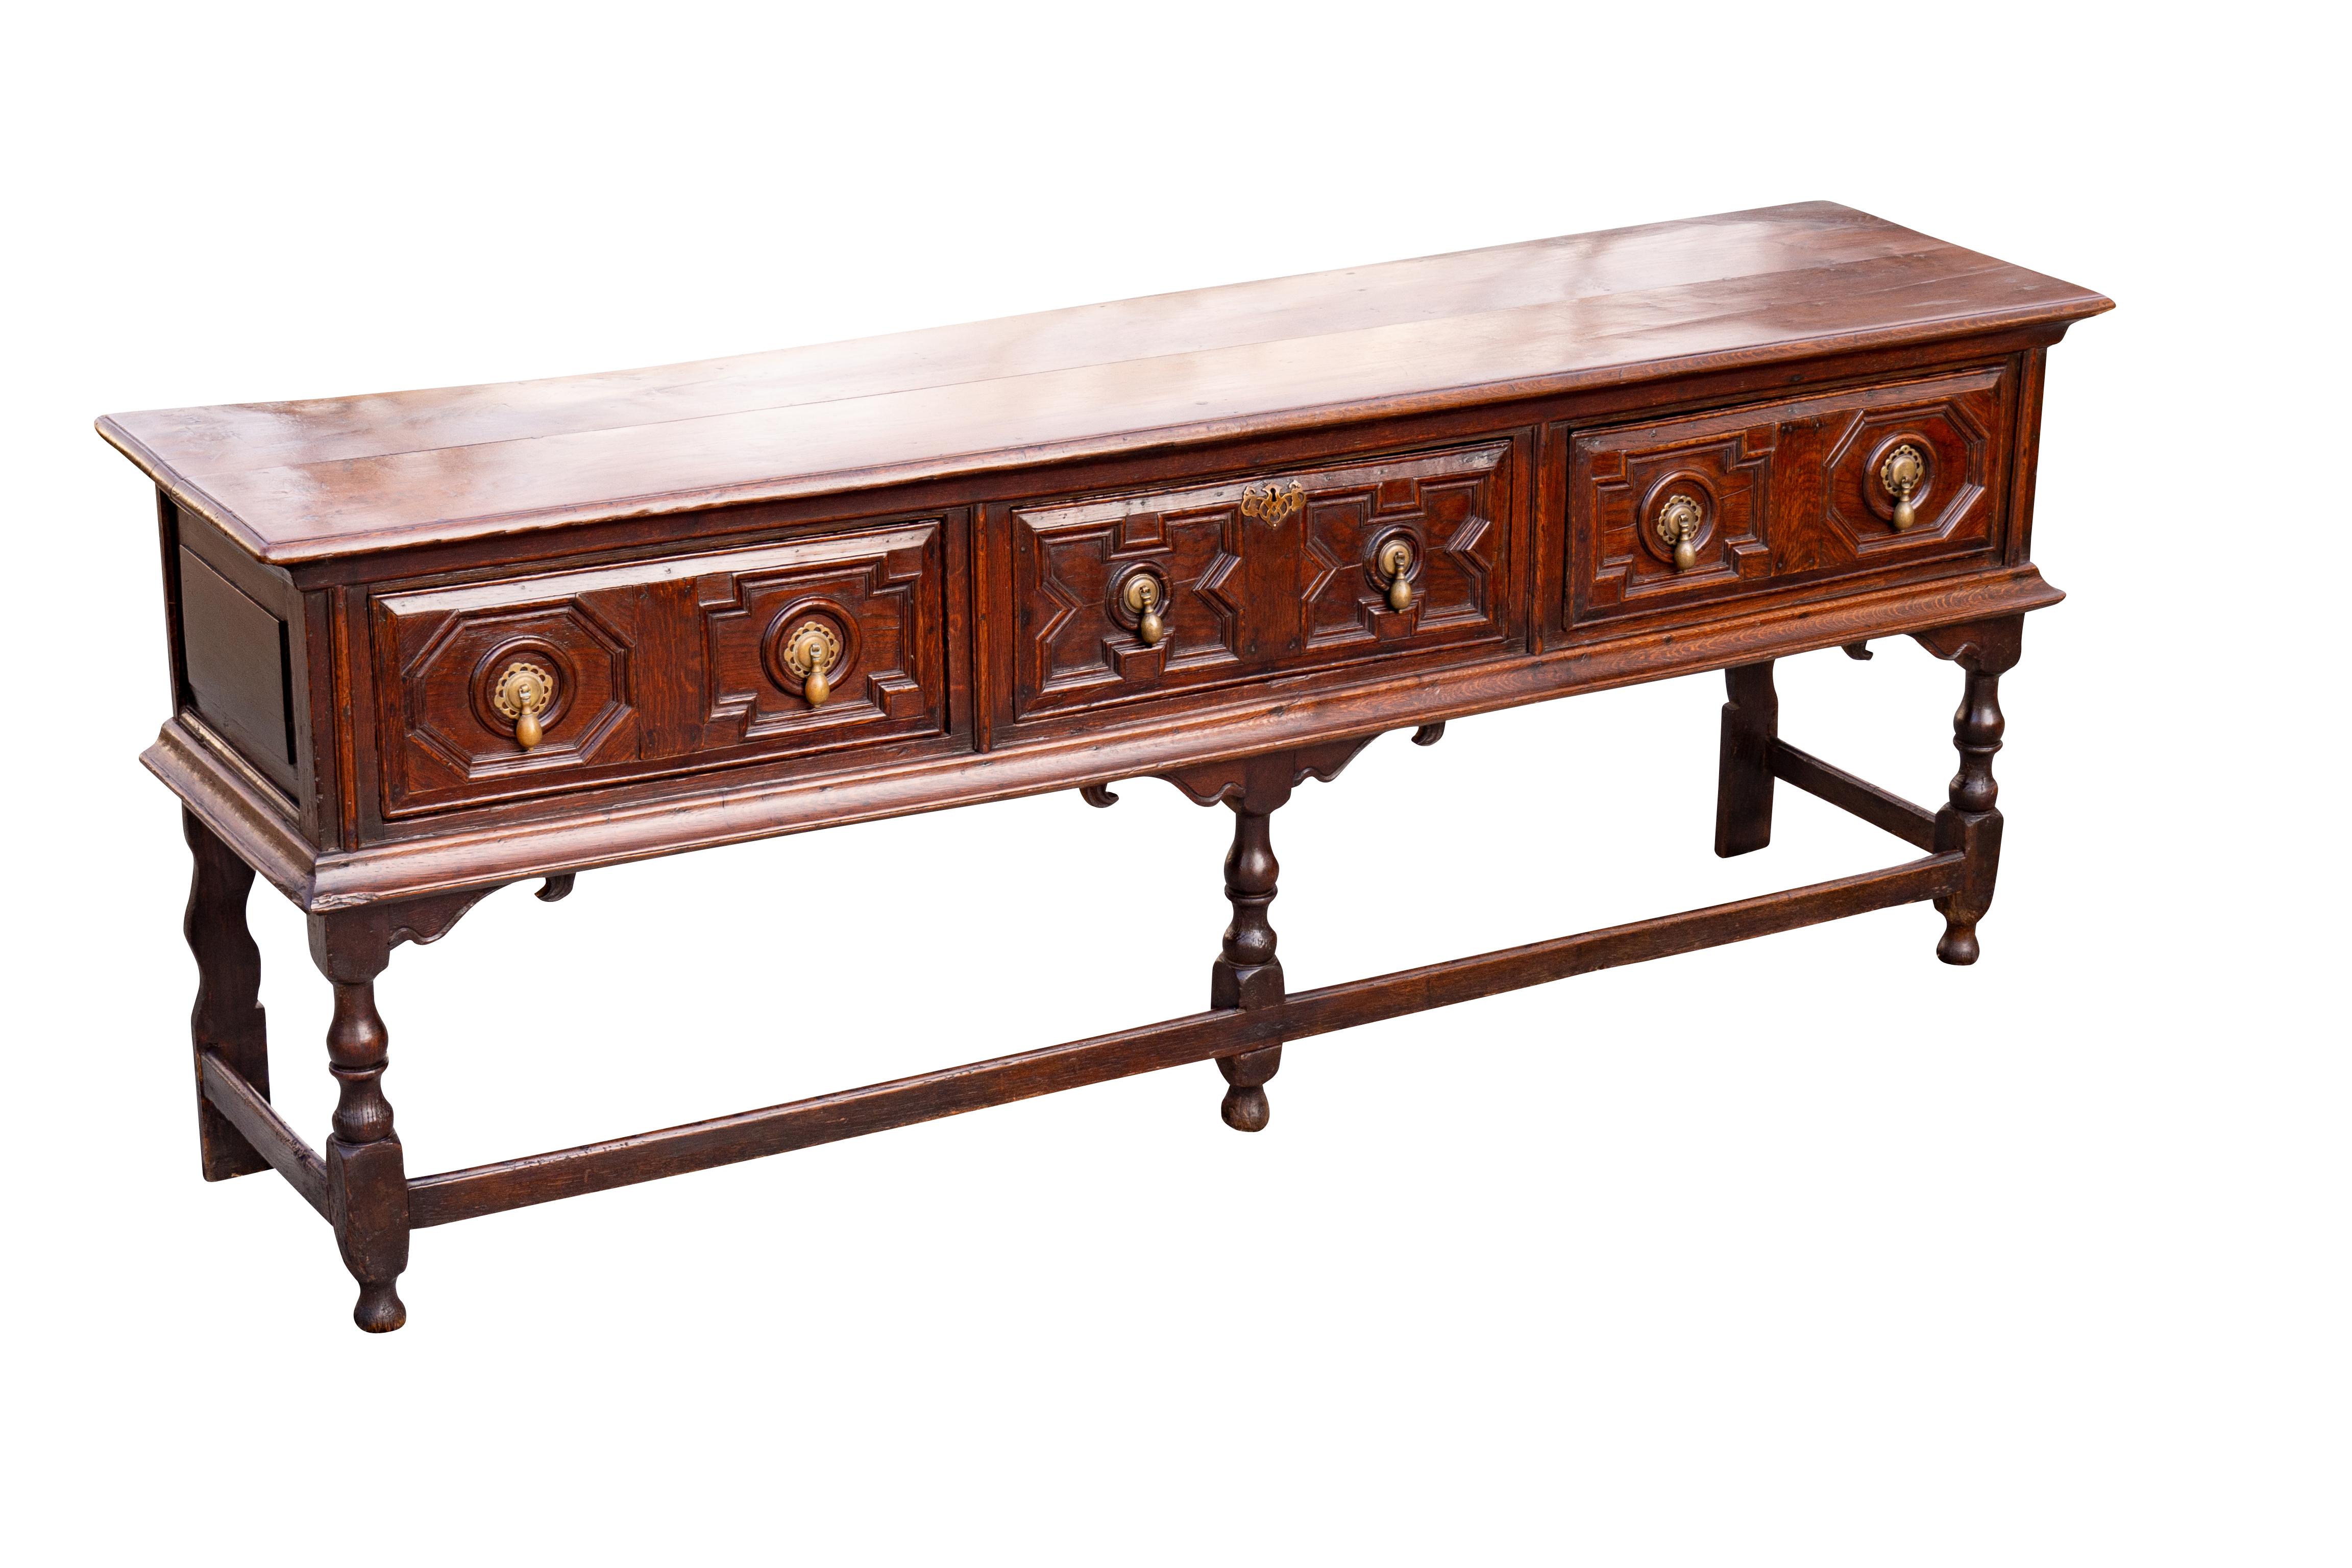 A very good example of good proportions and color with little restoration with the exception of the finish. Original hardware. Rectangular two board top over three nicely panelled drawers raised on three turned front legs with bracket form